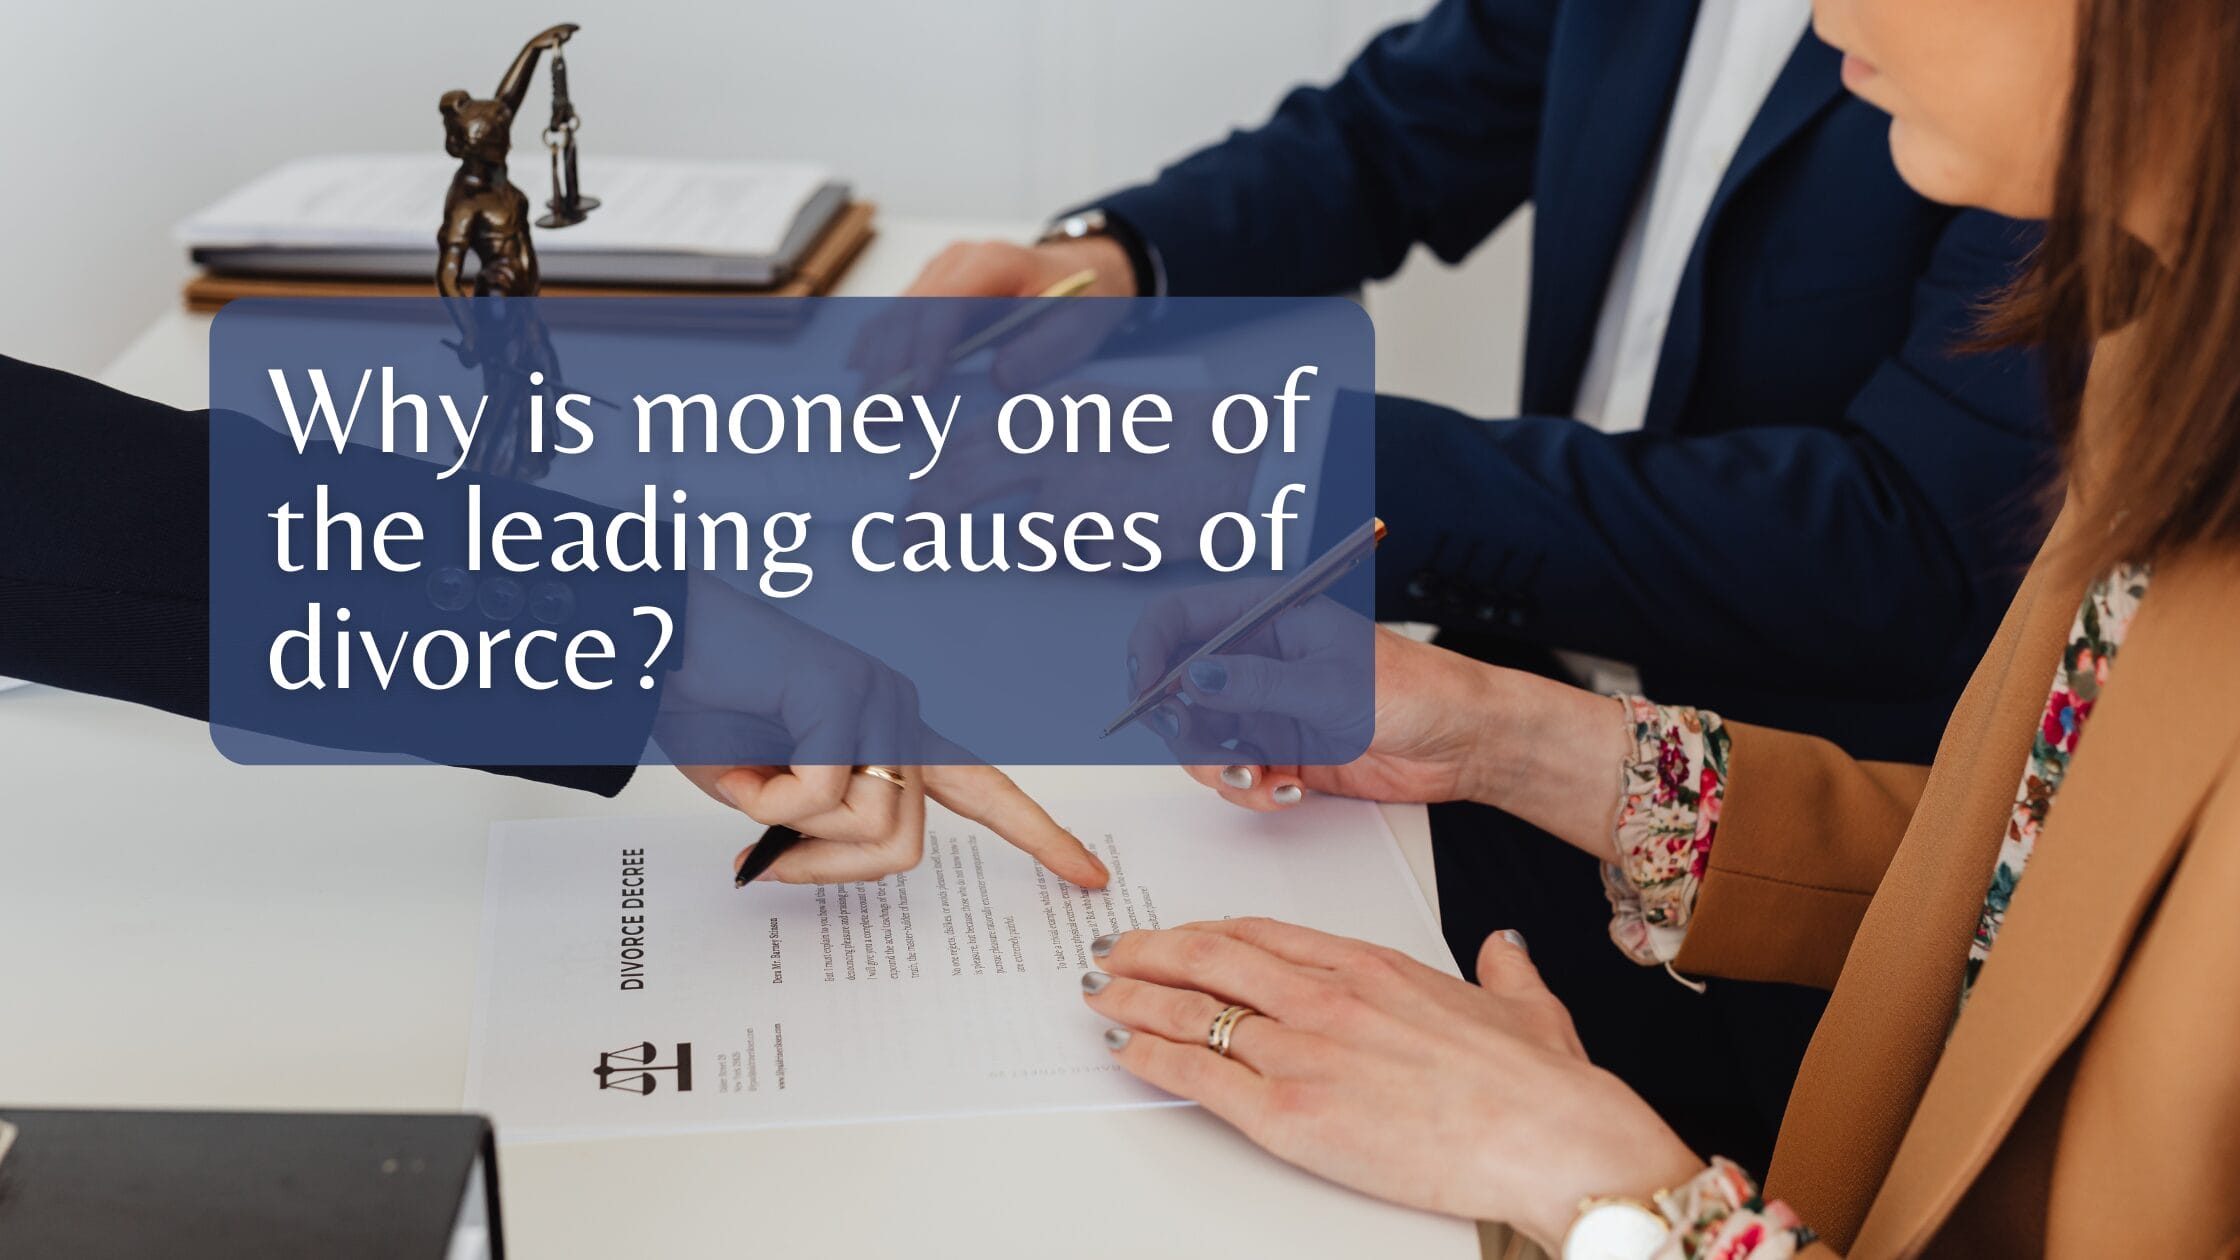 Why is money one of the leading causes of divorce?